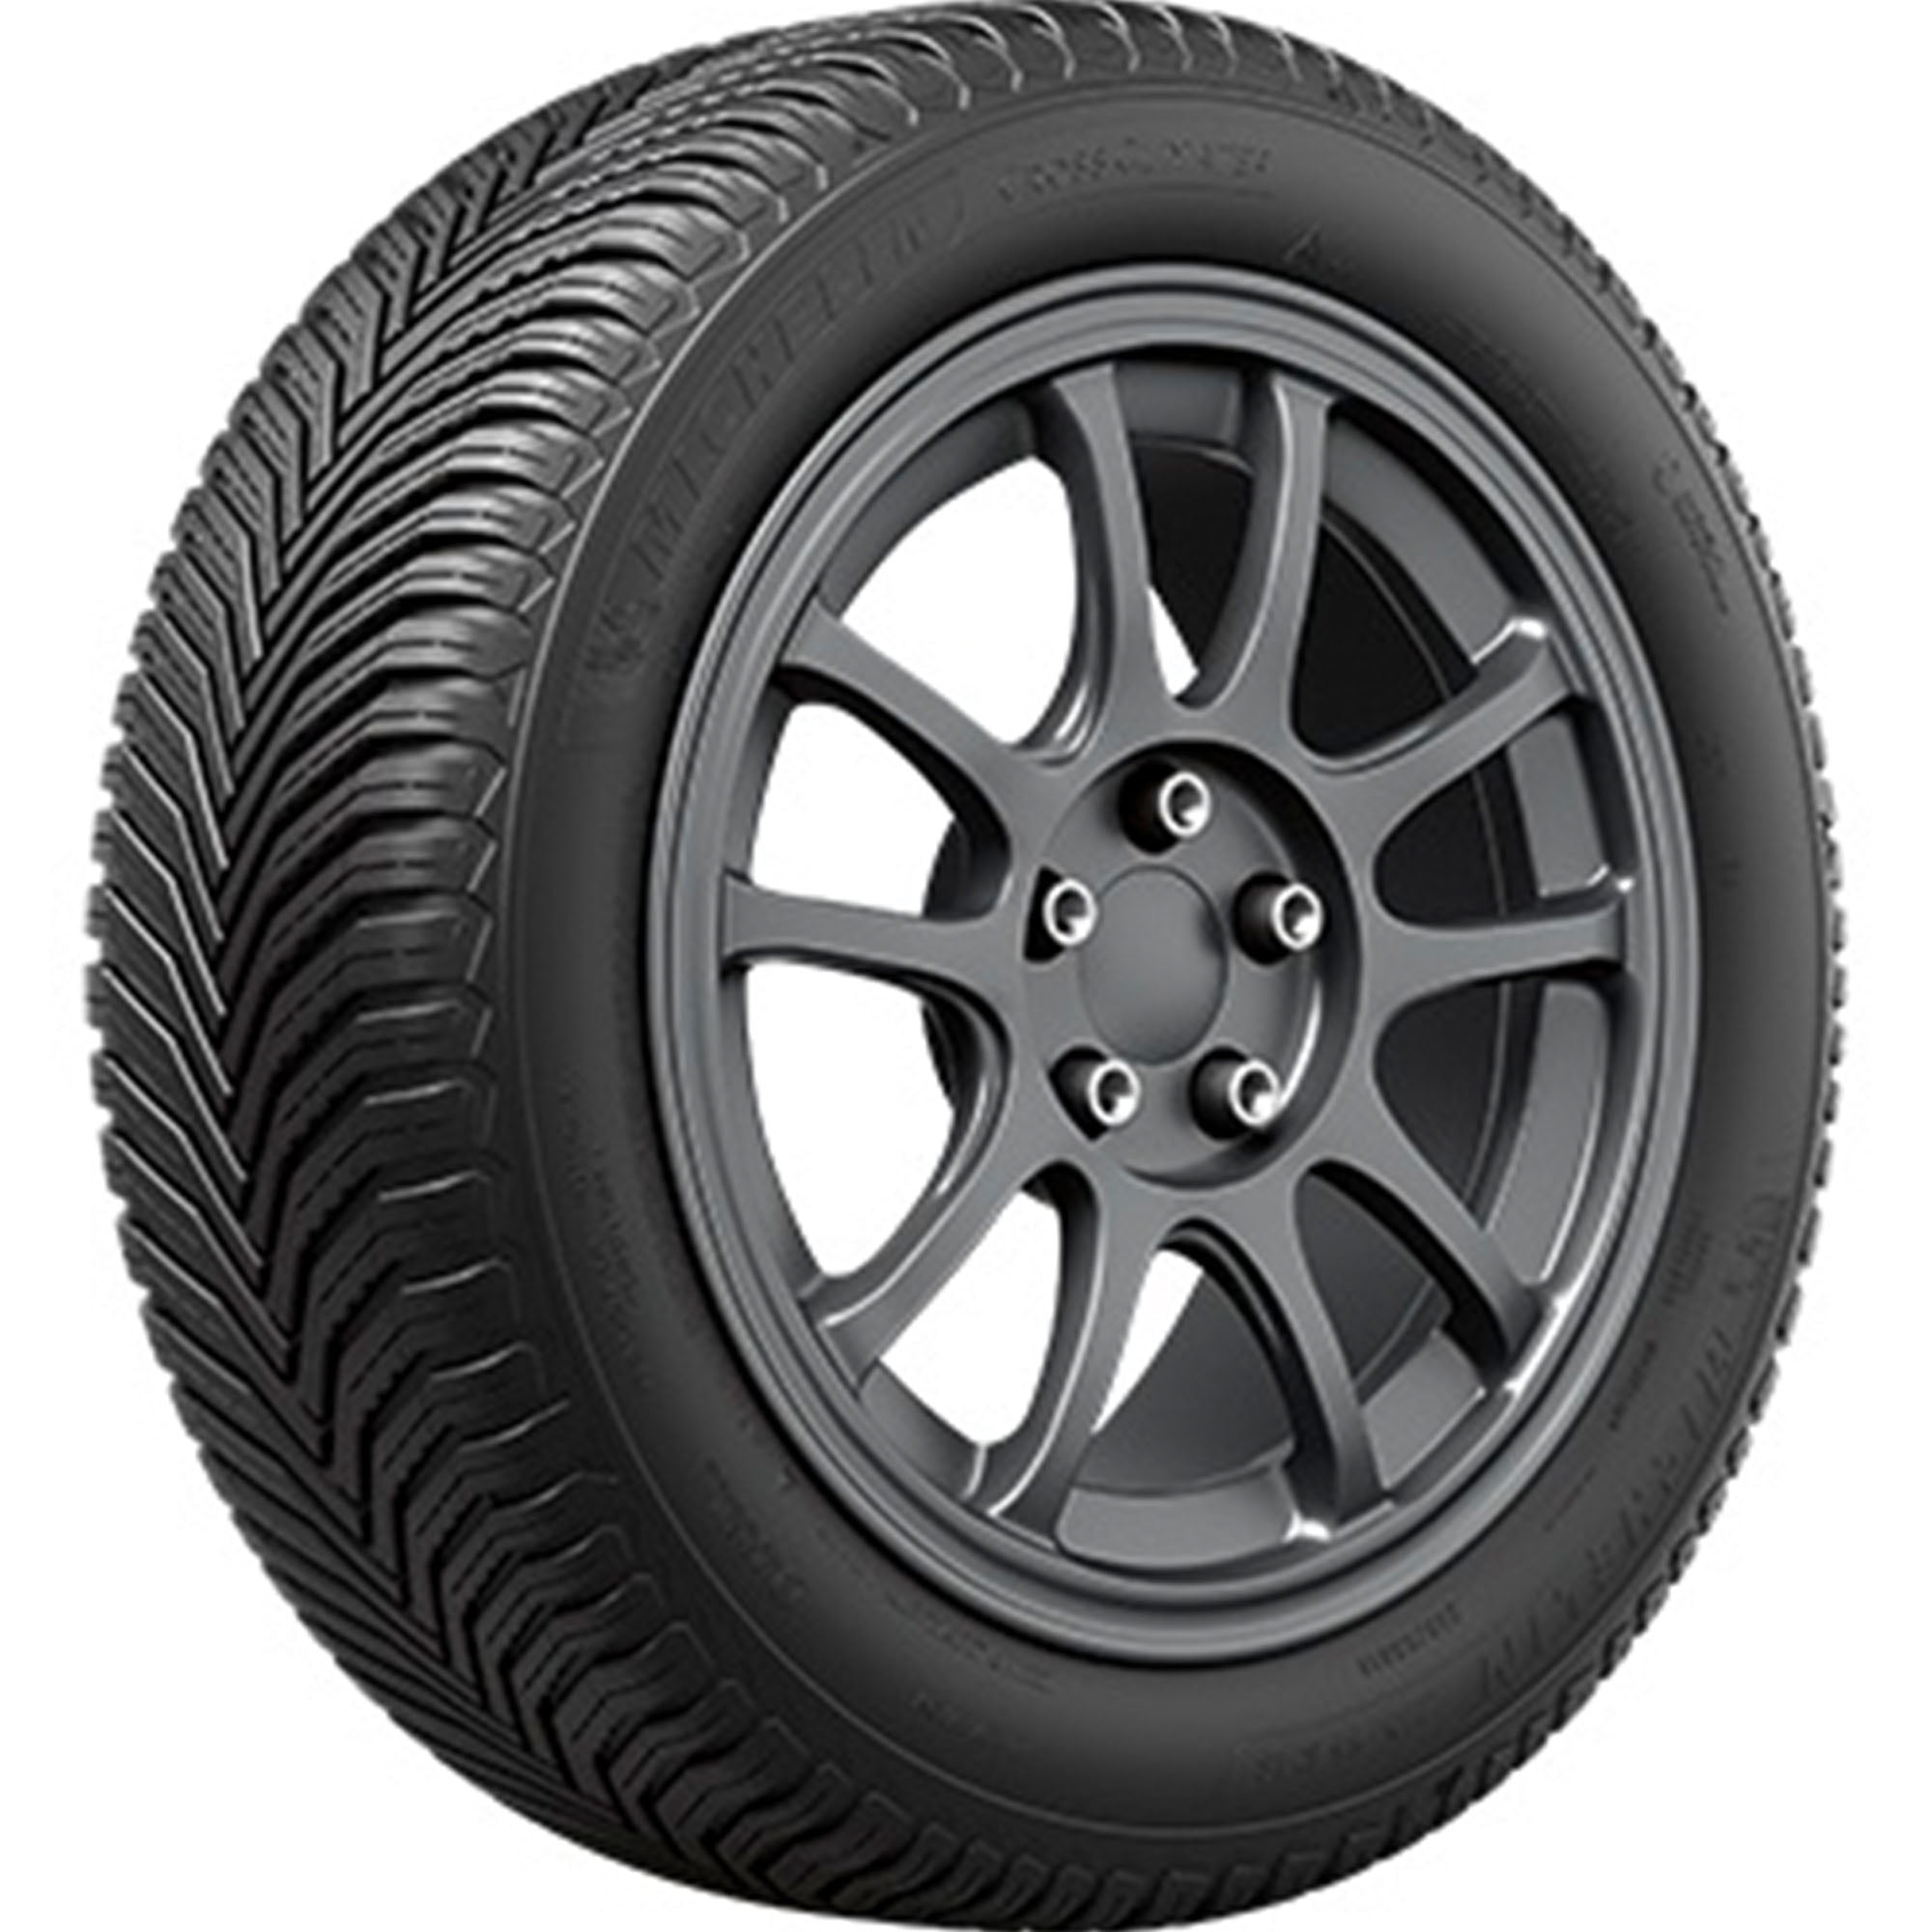 Climate2 SUV/Crossover Tire Weather 235/55R19 105V A/W Michelin XL All Cross